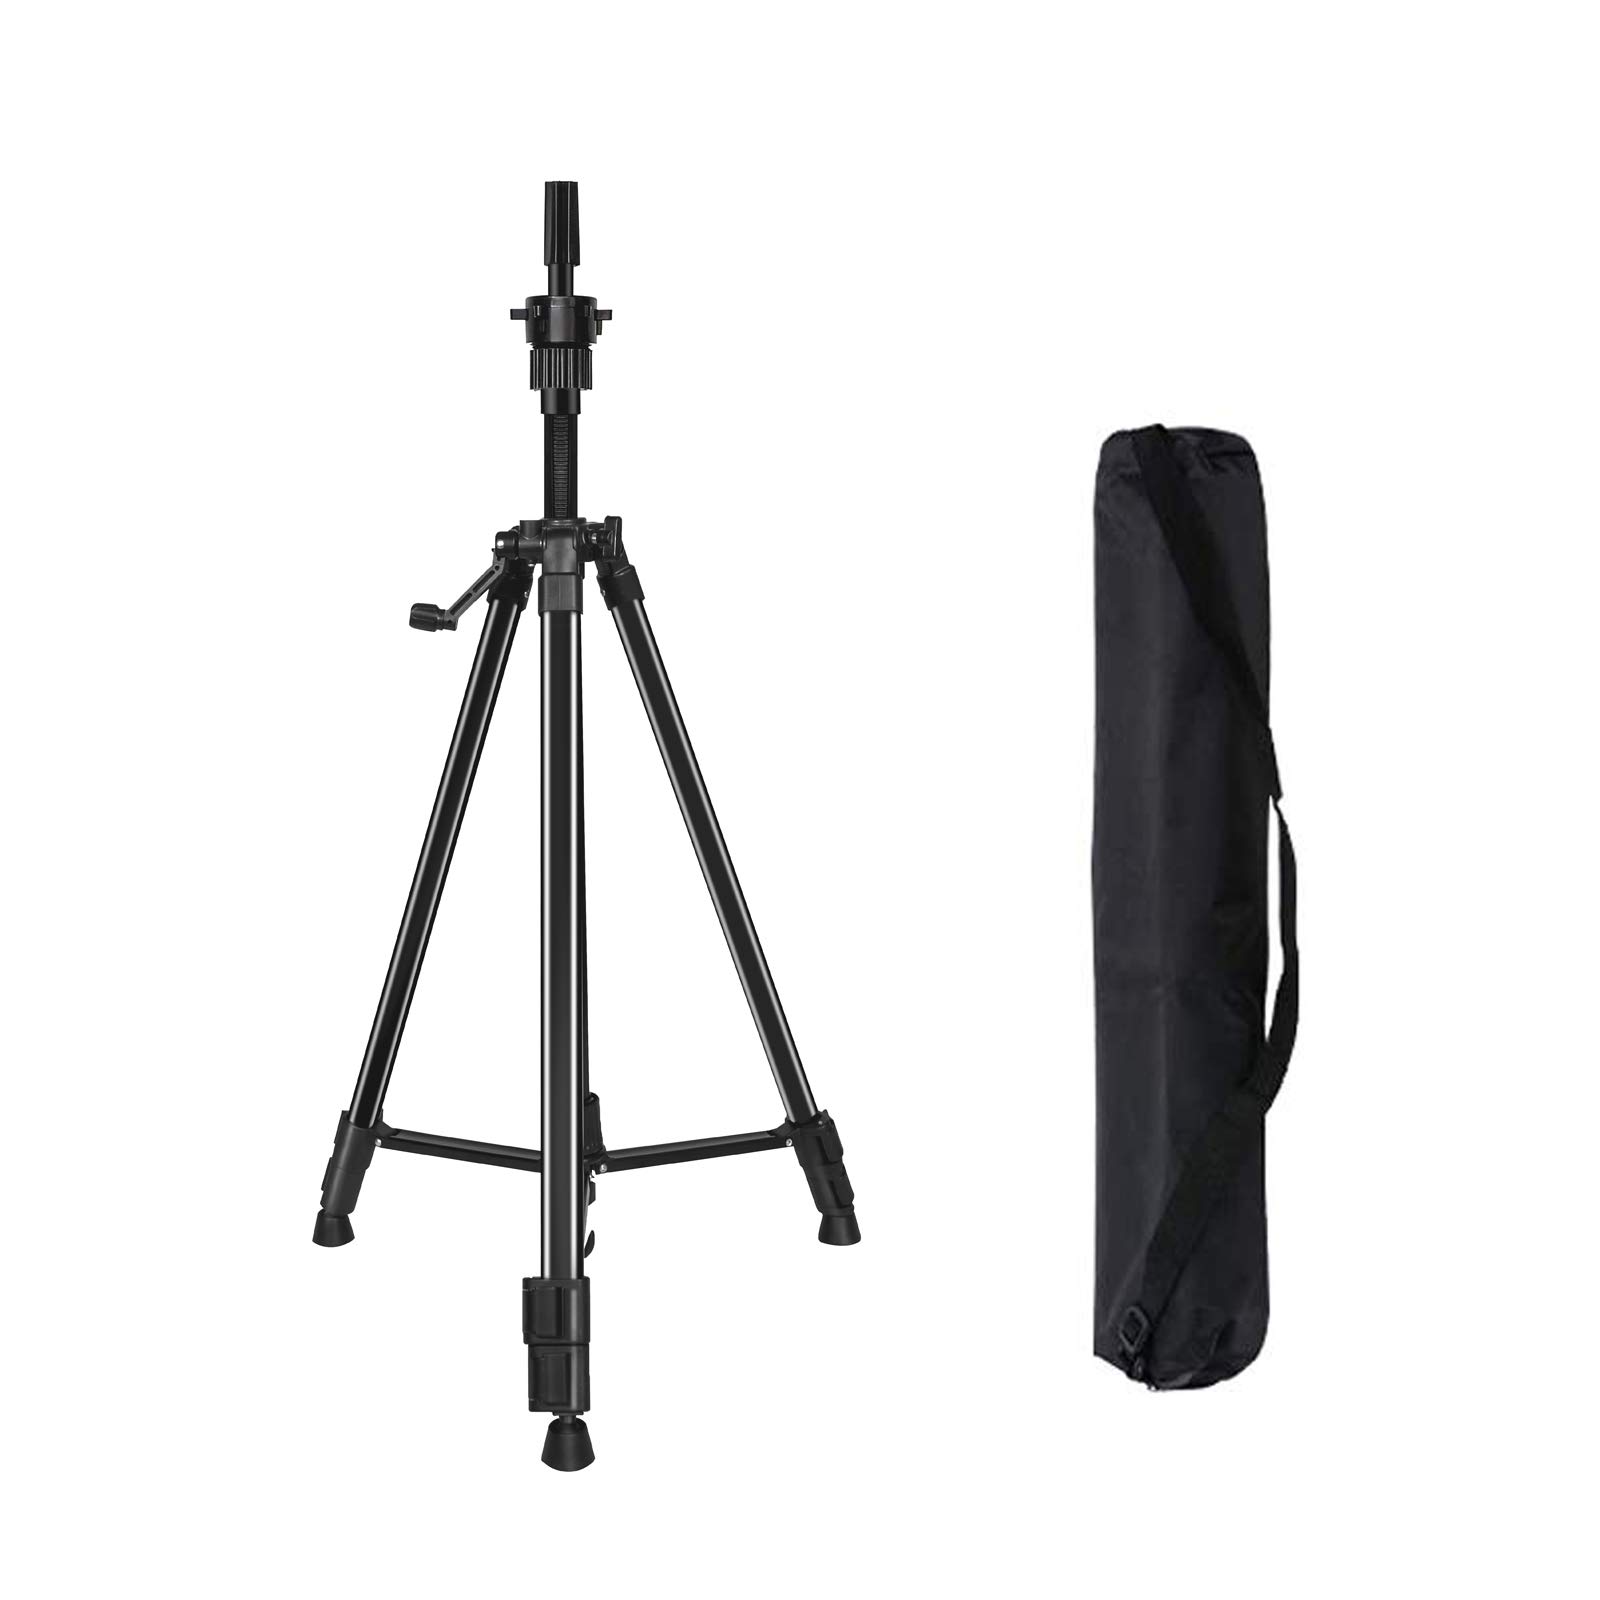 TheLAShop Mannequin Stand Metal Tripod Adjustable Height